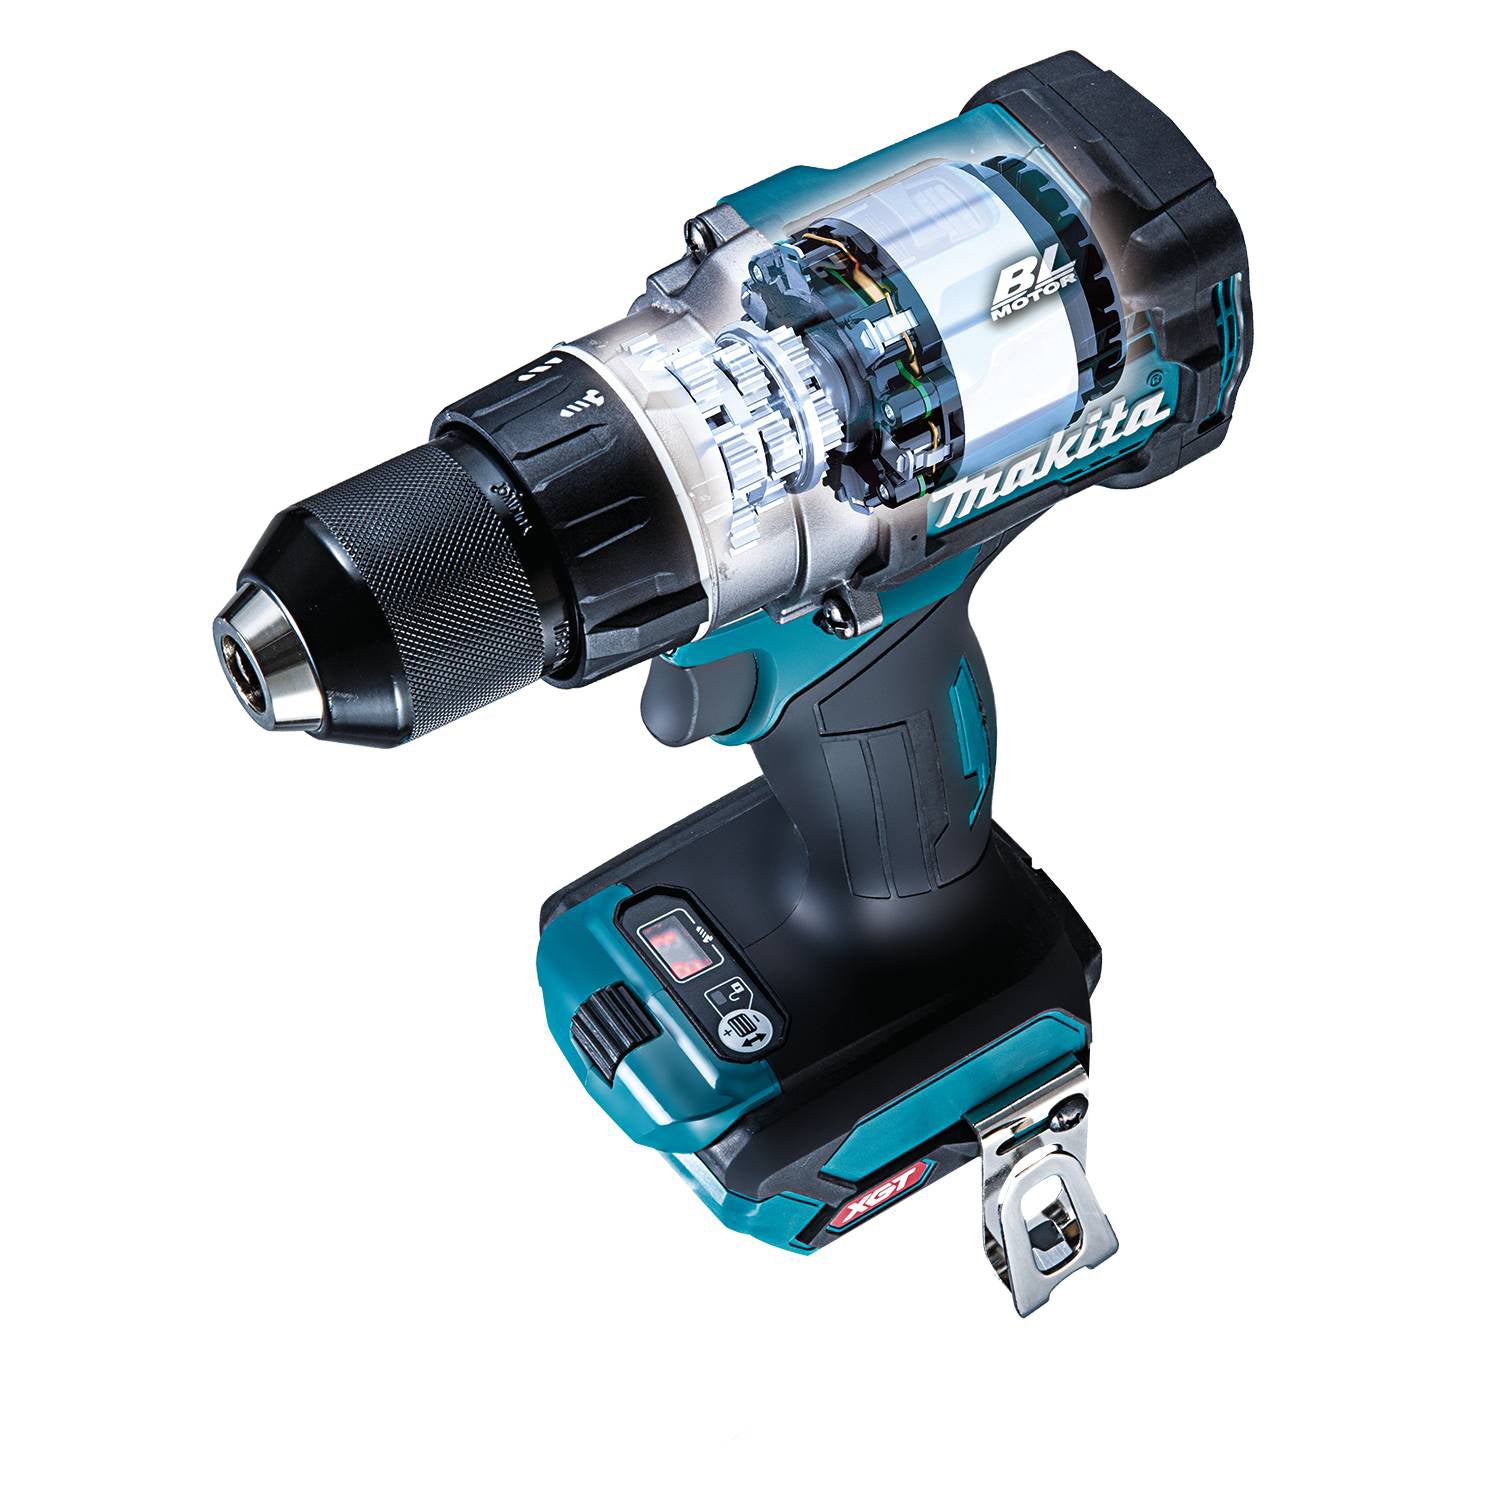 40V Max XGT Lithium-Ion Brushless Cordless 1/2" Hammer Driver‑Drill (Tool Only)